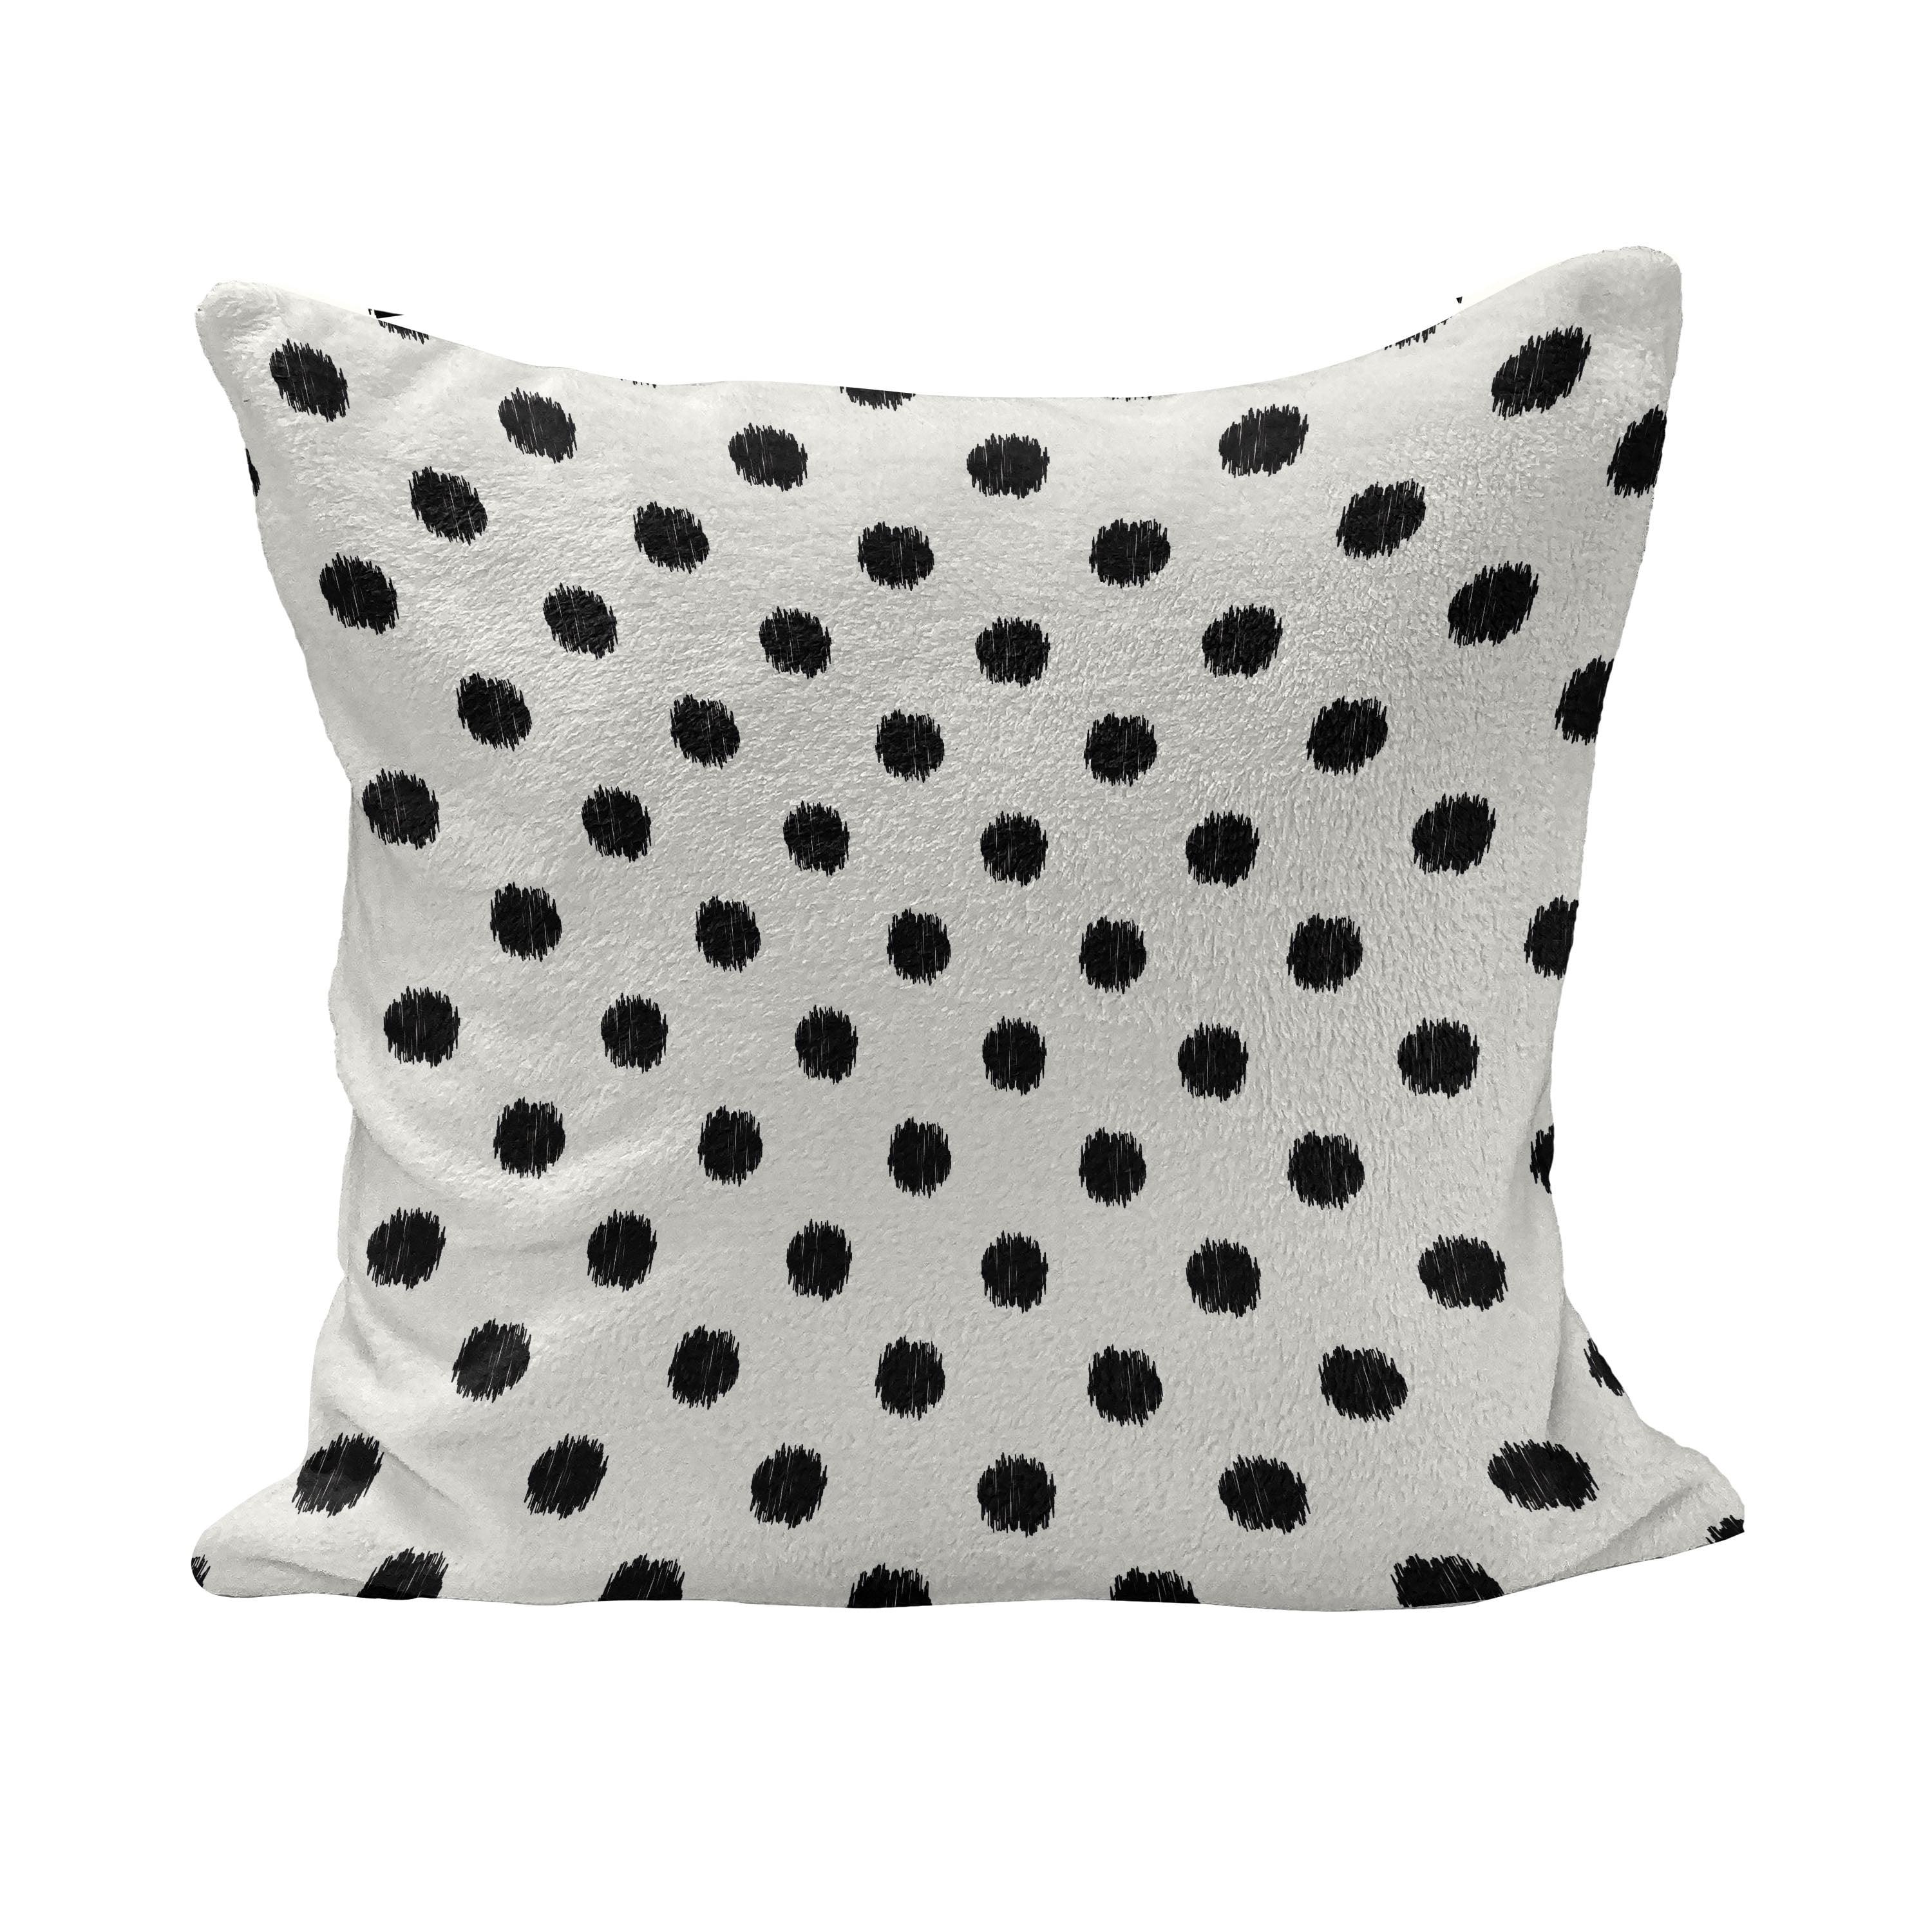 Multicolor Design Minds Boutique Black and White Polka Dot Spots Throw Pillow 18x18